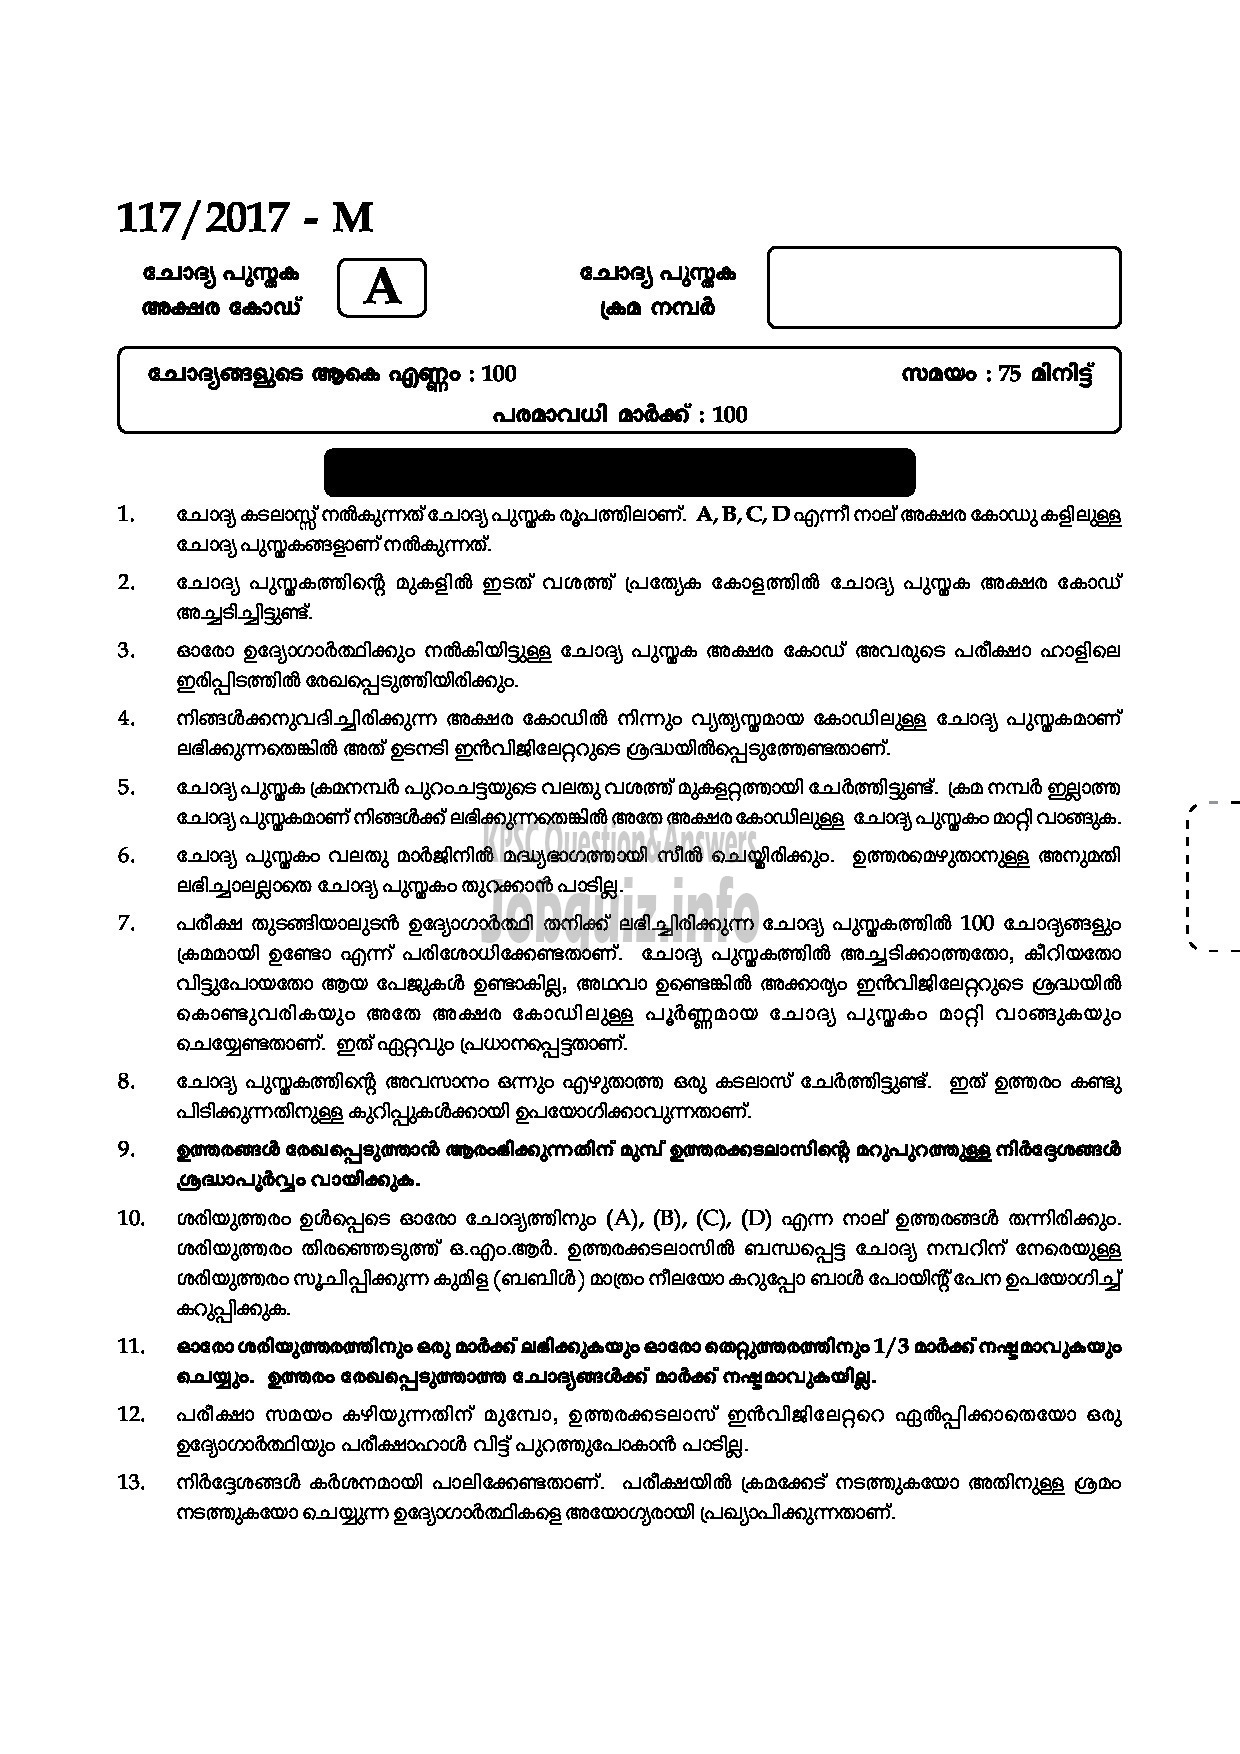 Kerala PSC Question Paper - LAST GRADE SERVANTS VARIOUS GOVT.OWNED COMPANIES/CORPORATIONS/BOARDS MALAYALAM-1